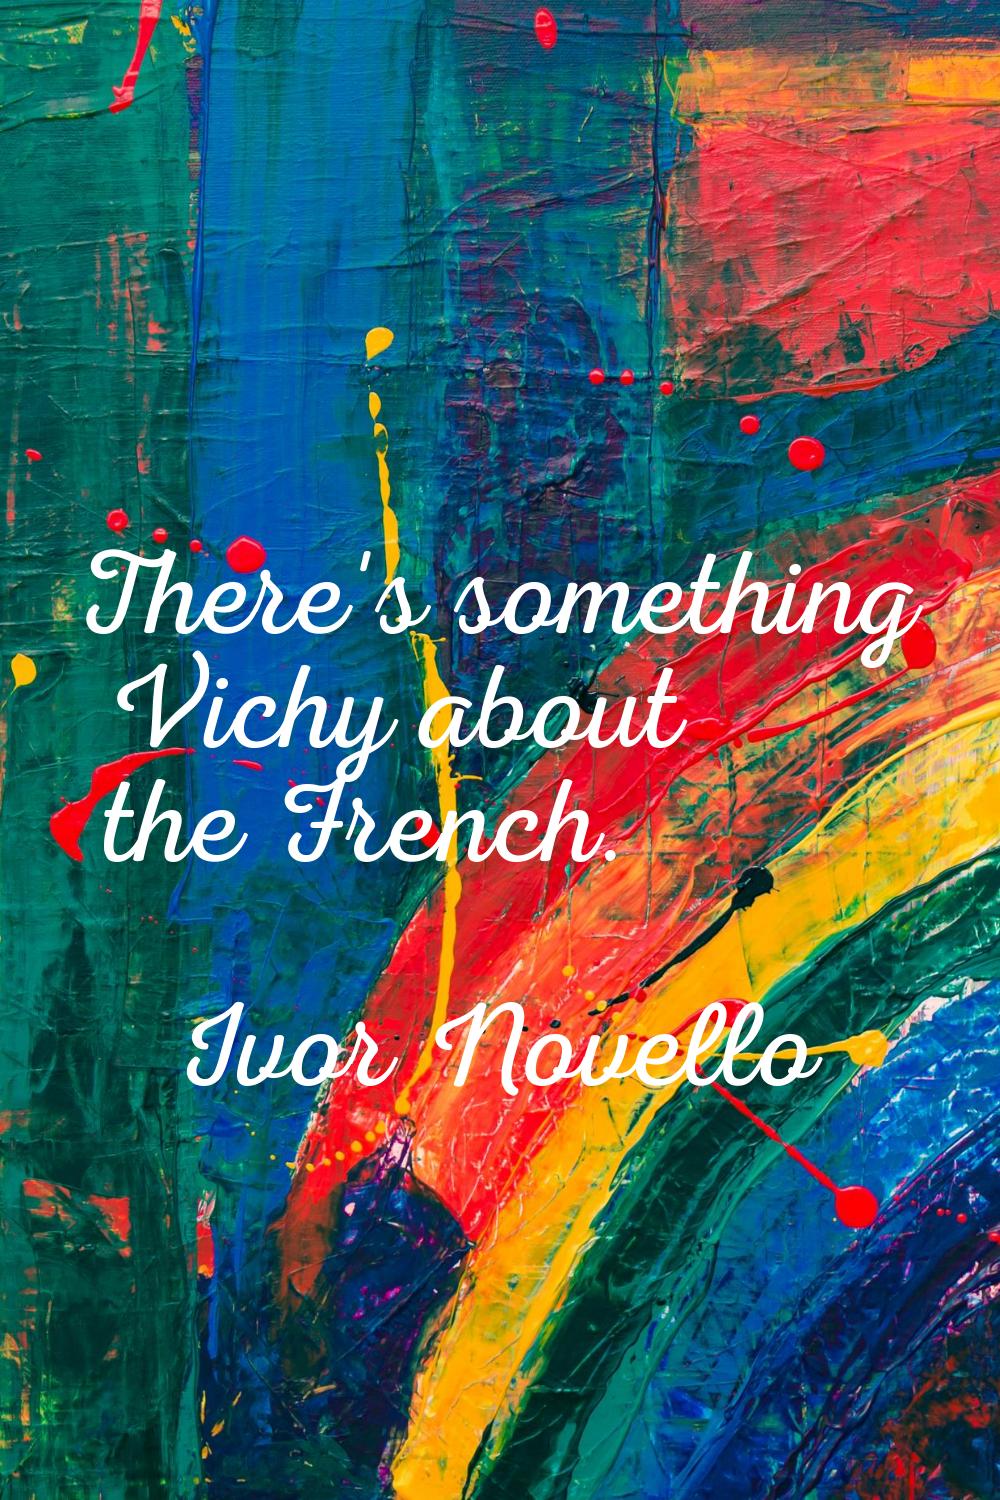 There's something Vichy about the French.